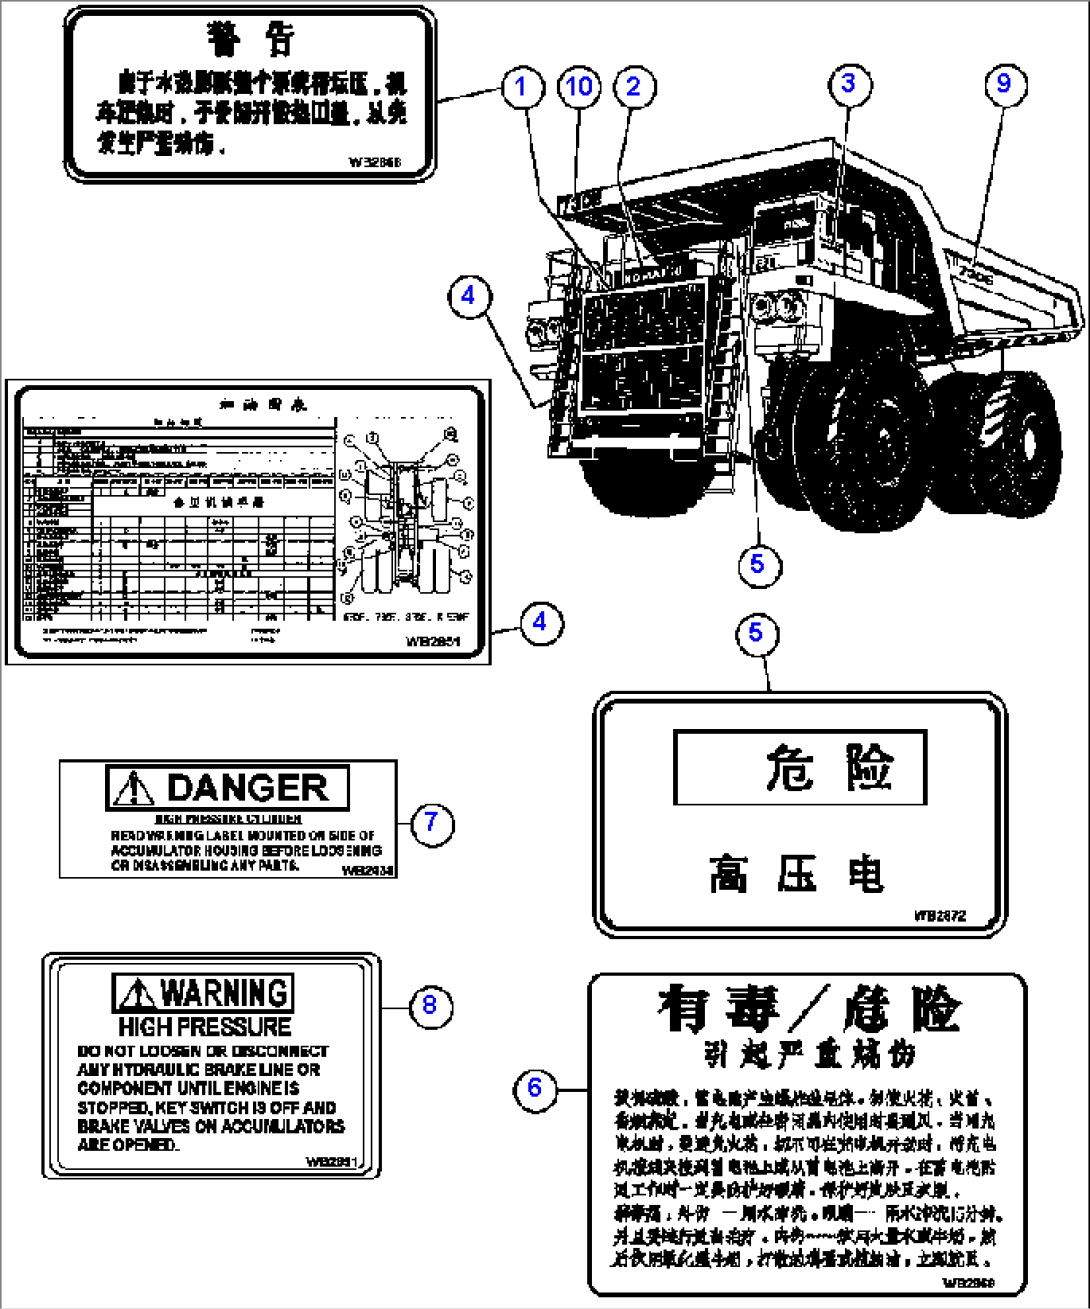 DECALS & WARNINGS (CHINESE) - 1